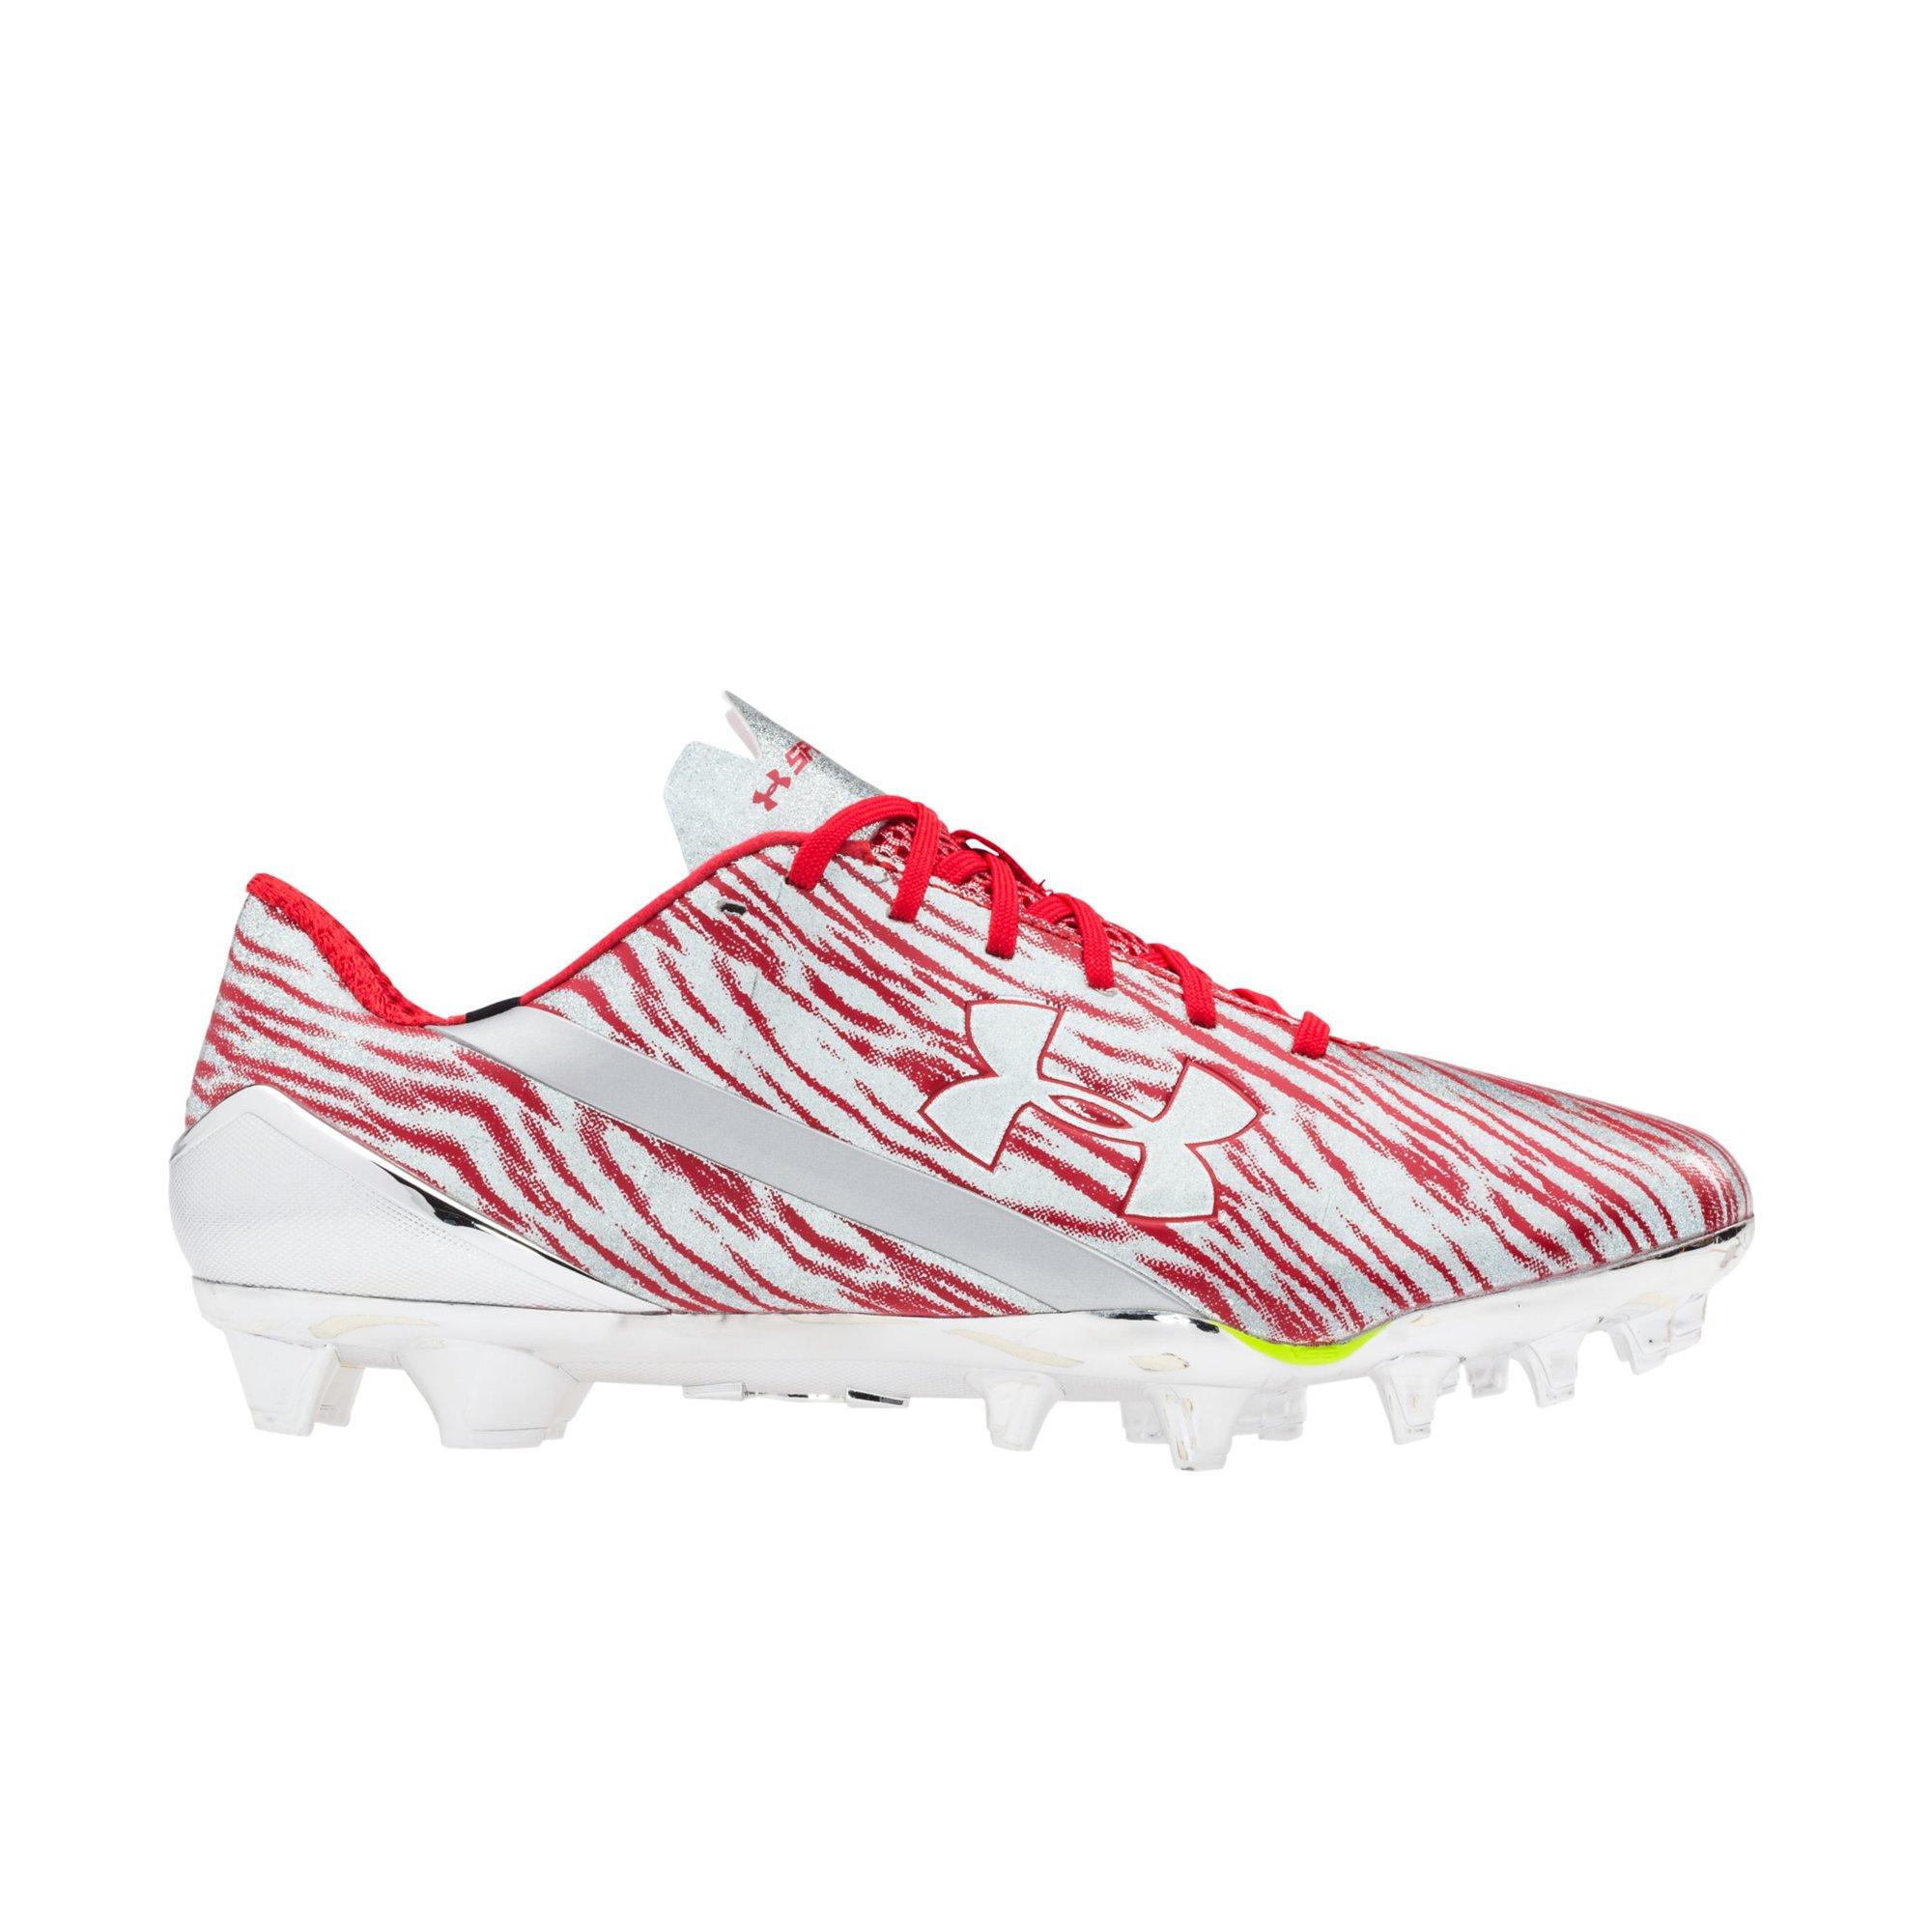 silver under armour cleats